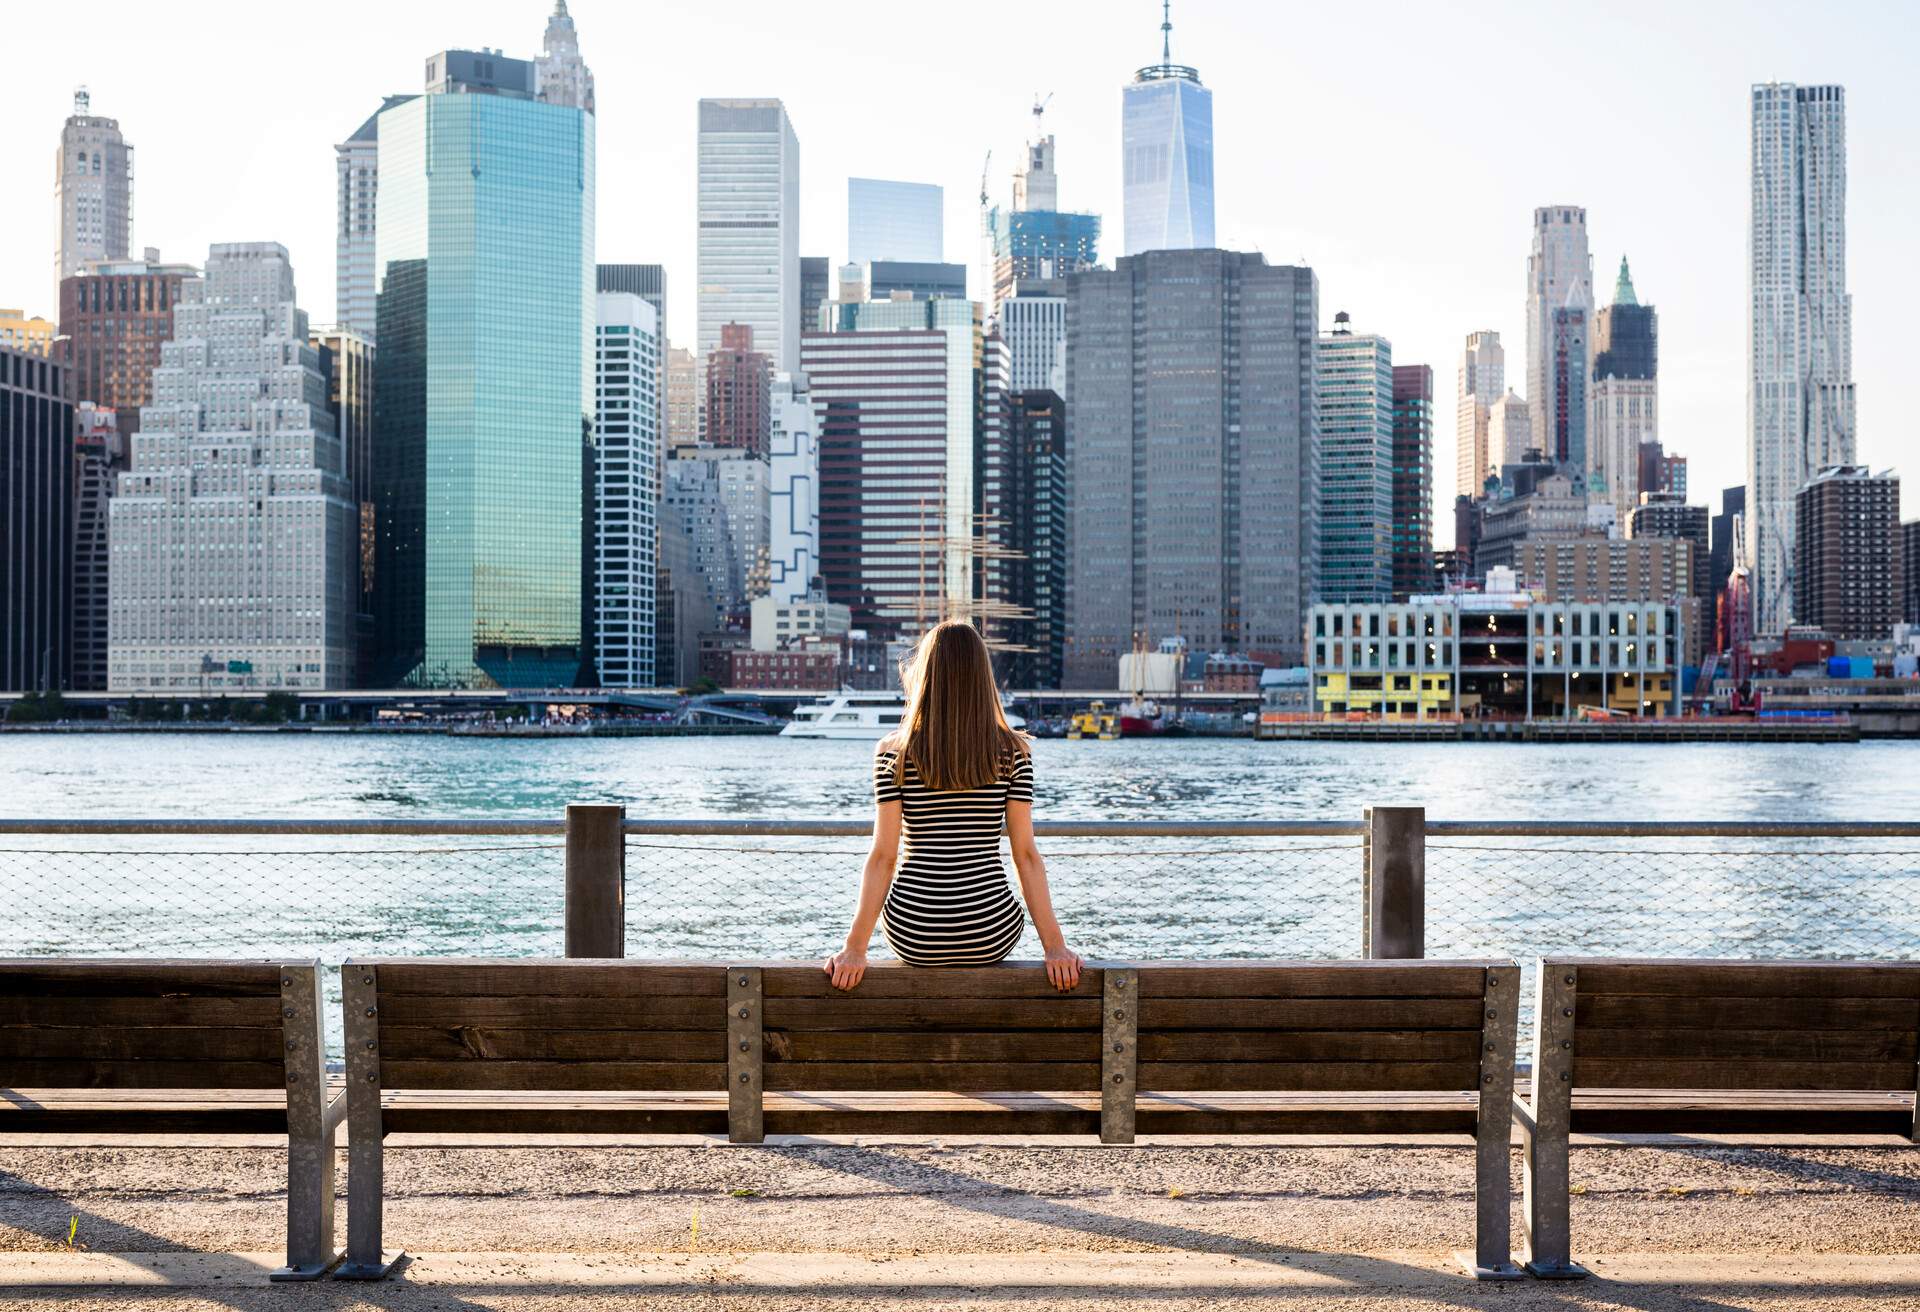 A woman sitting on the backrest of a bench seat facing the massive buildings across a river.